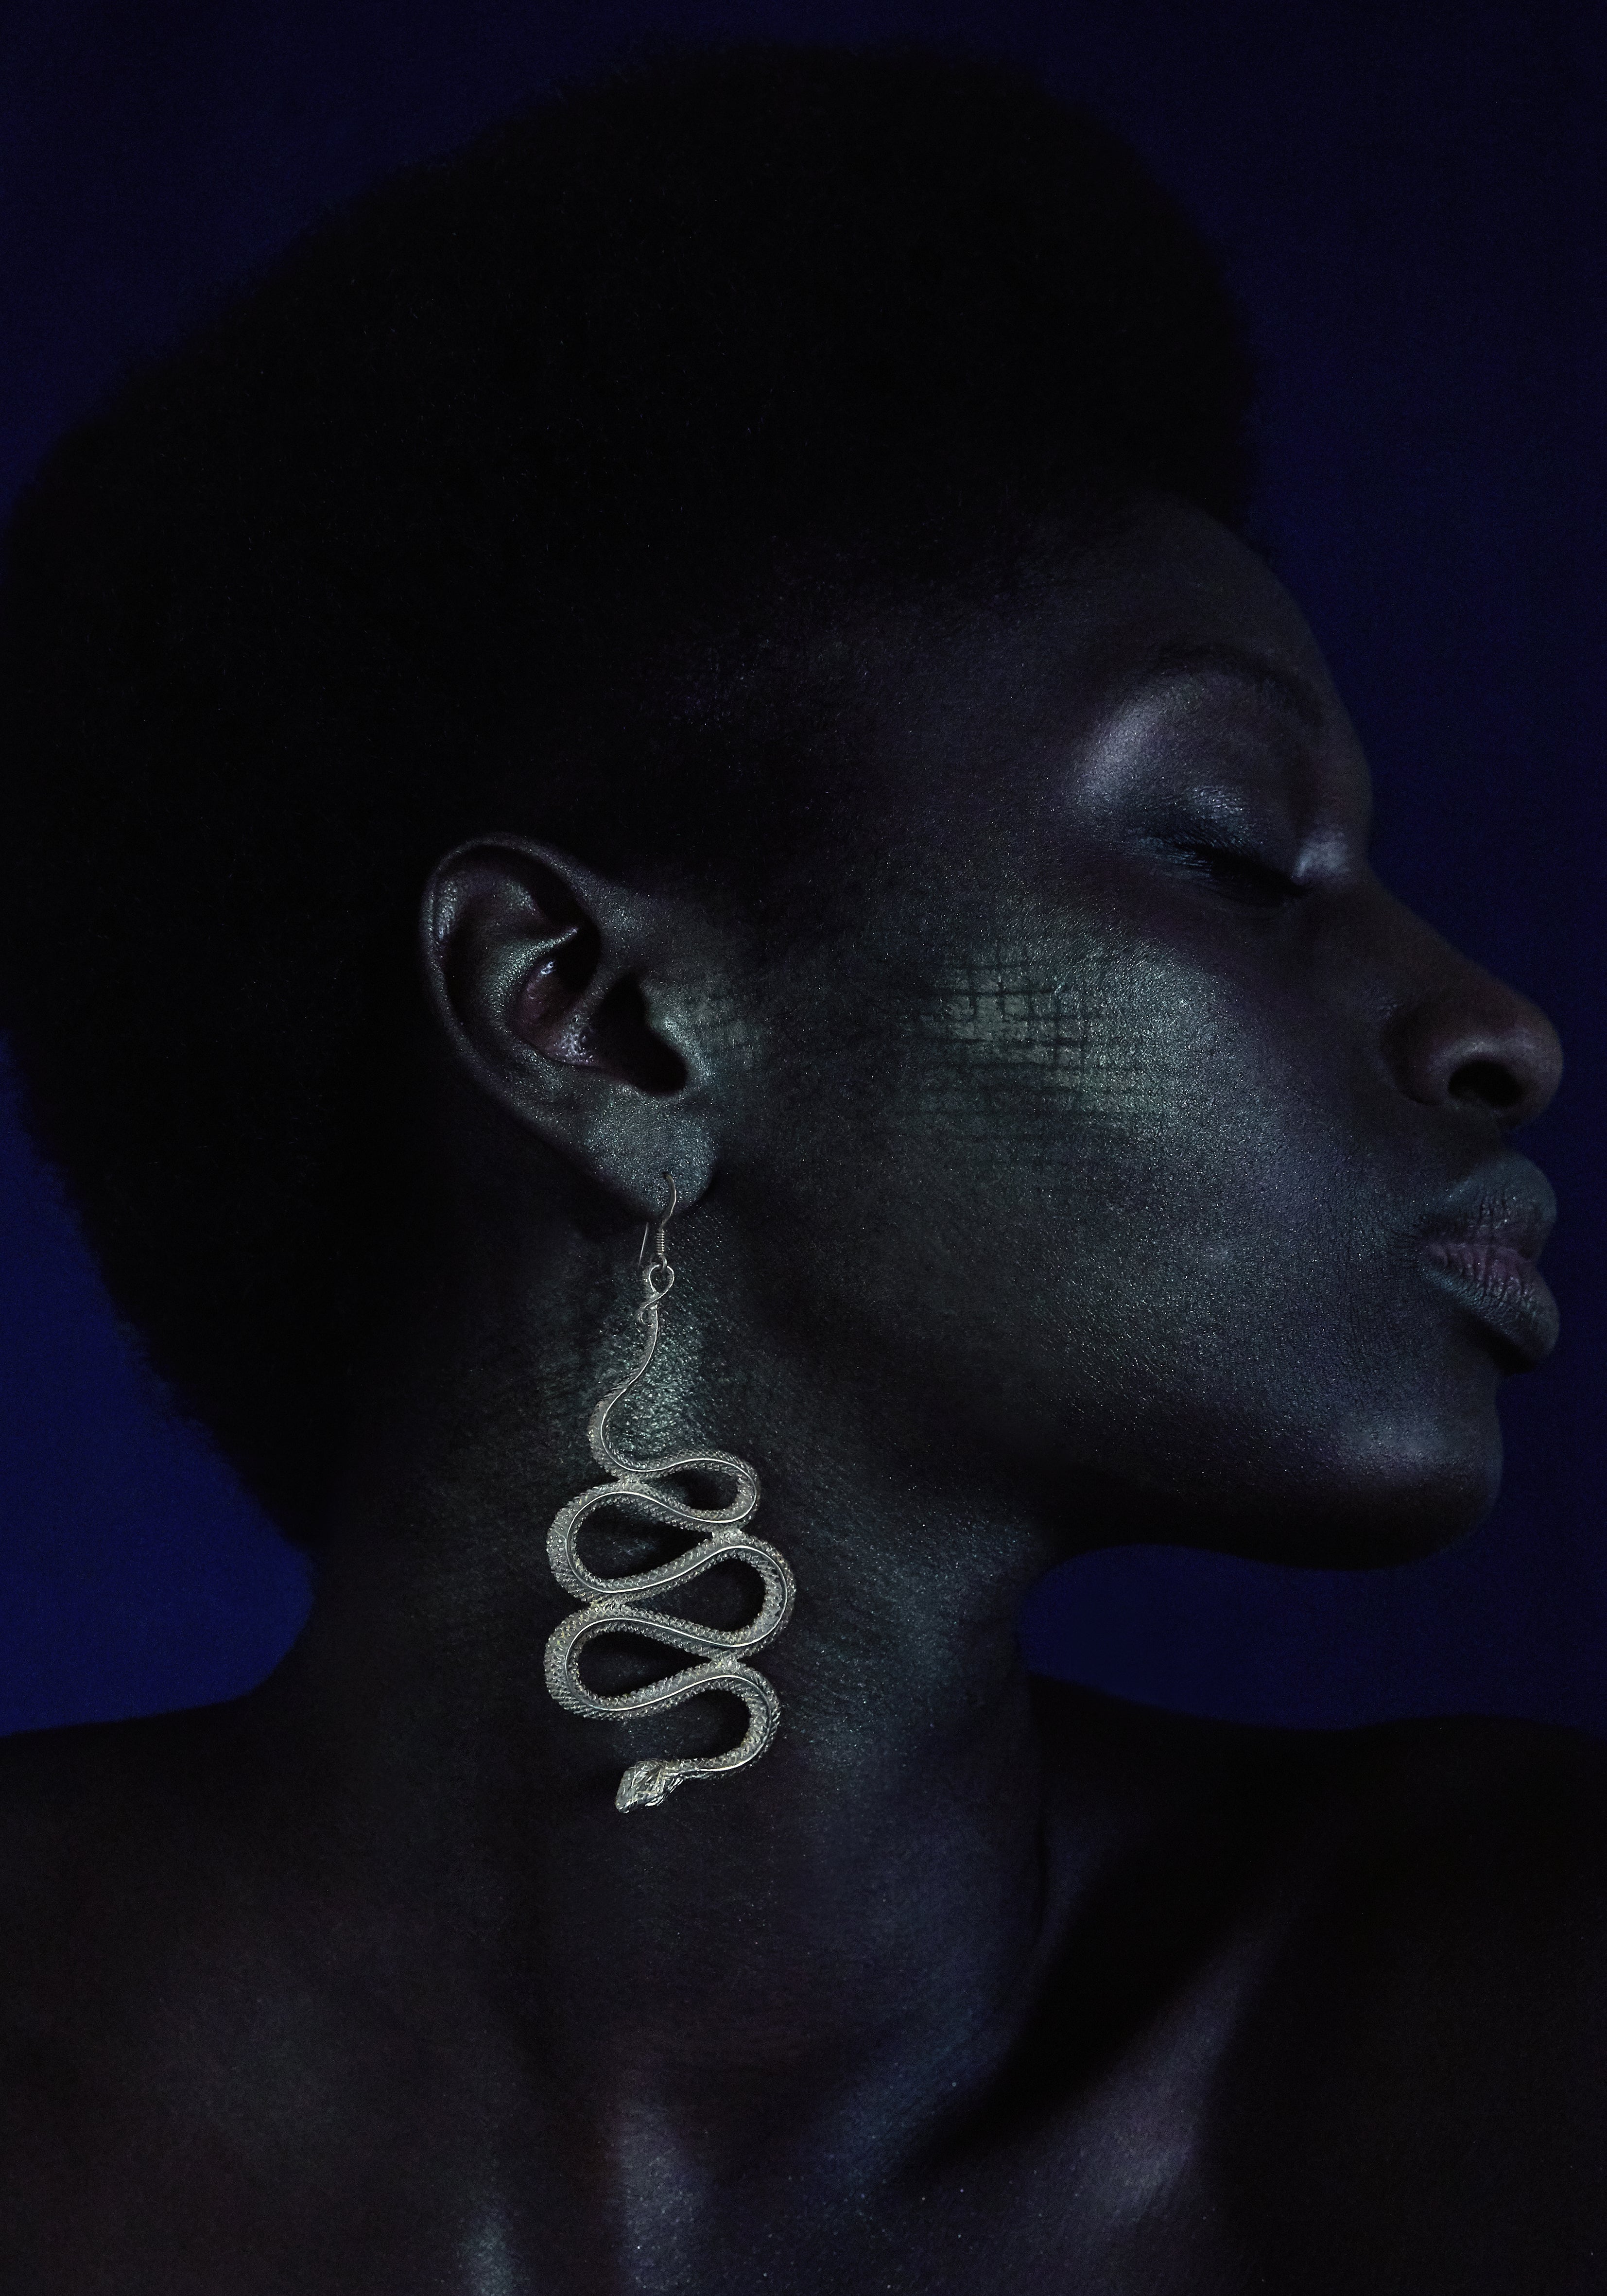 VIKA jewels ethical sustainable jewellery recycled sterling silver jewelry photographed by katia wil berlin